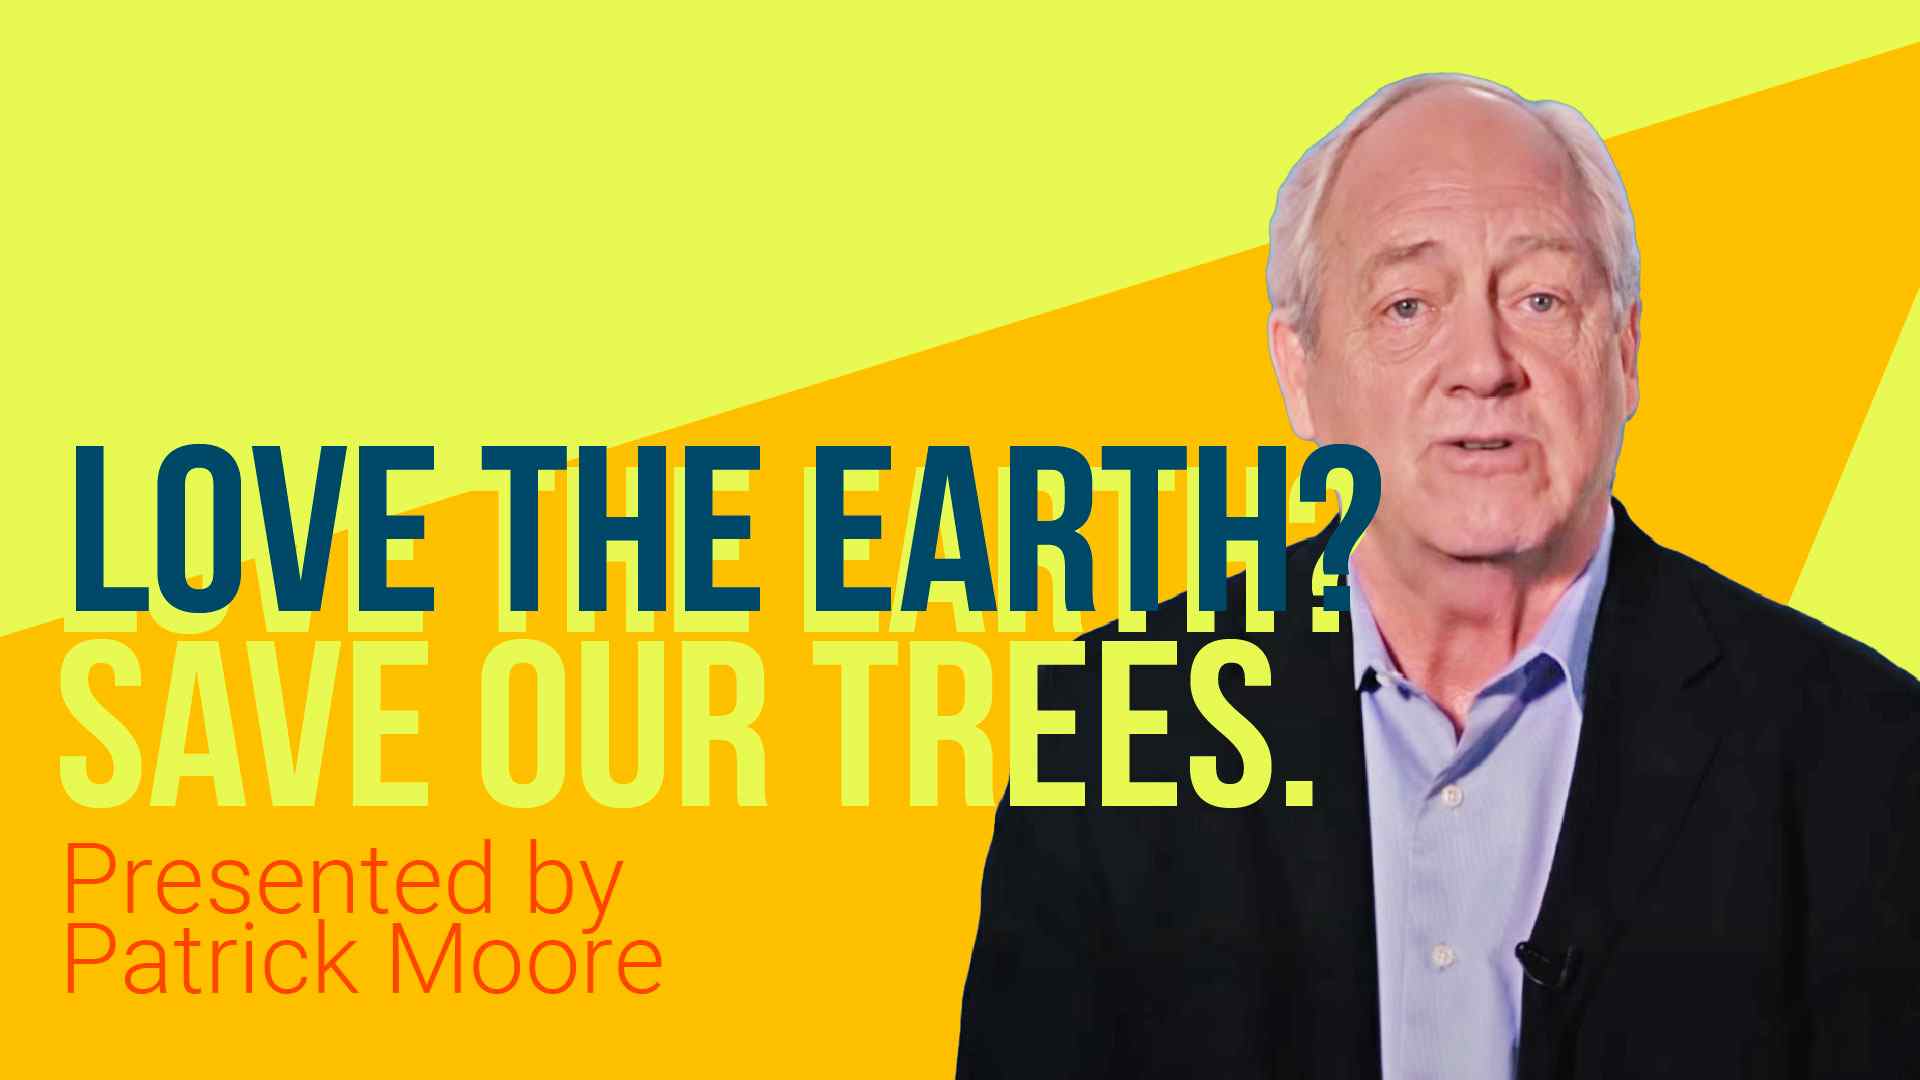 Love the Earth? Save Our Trees